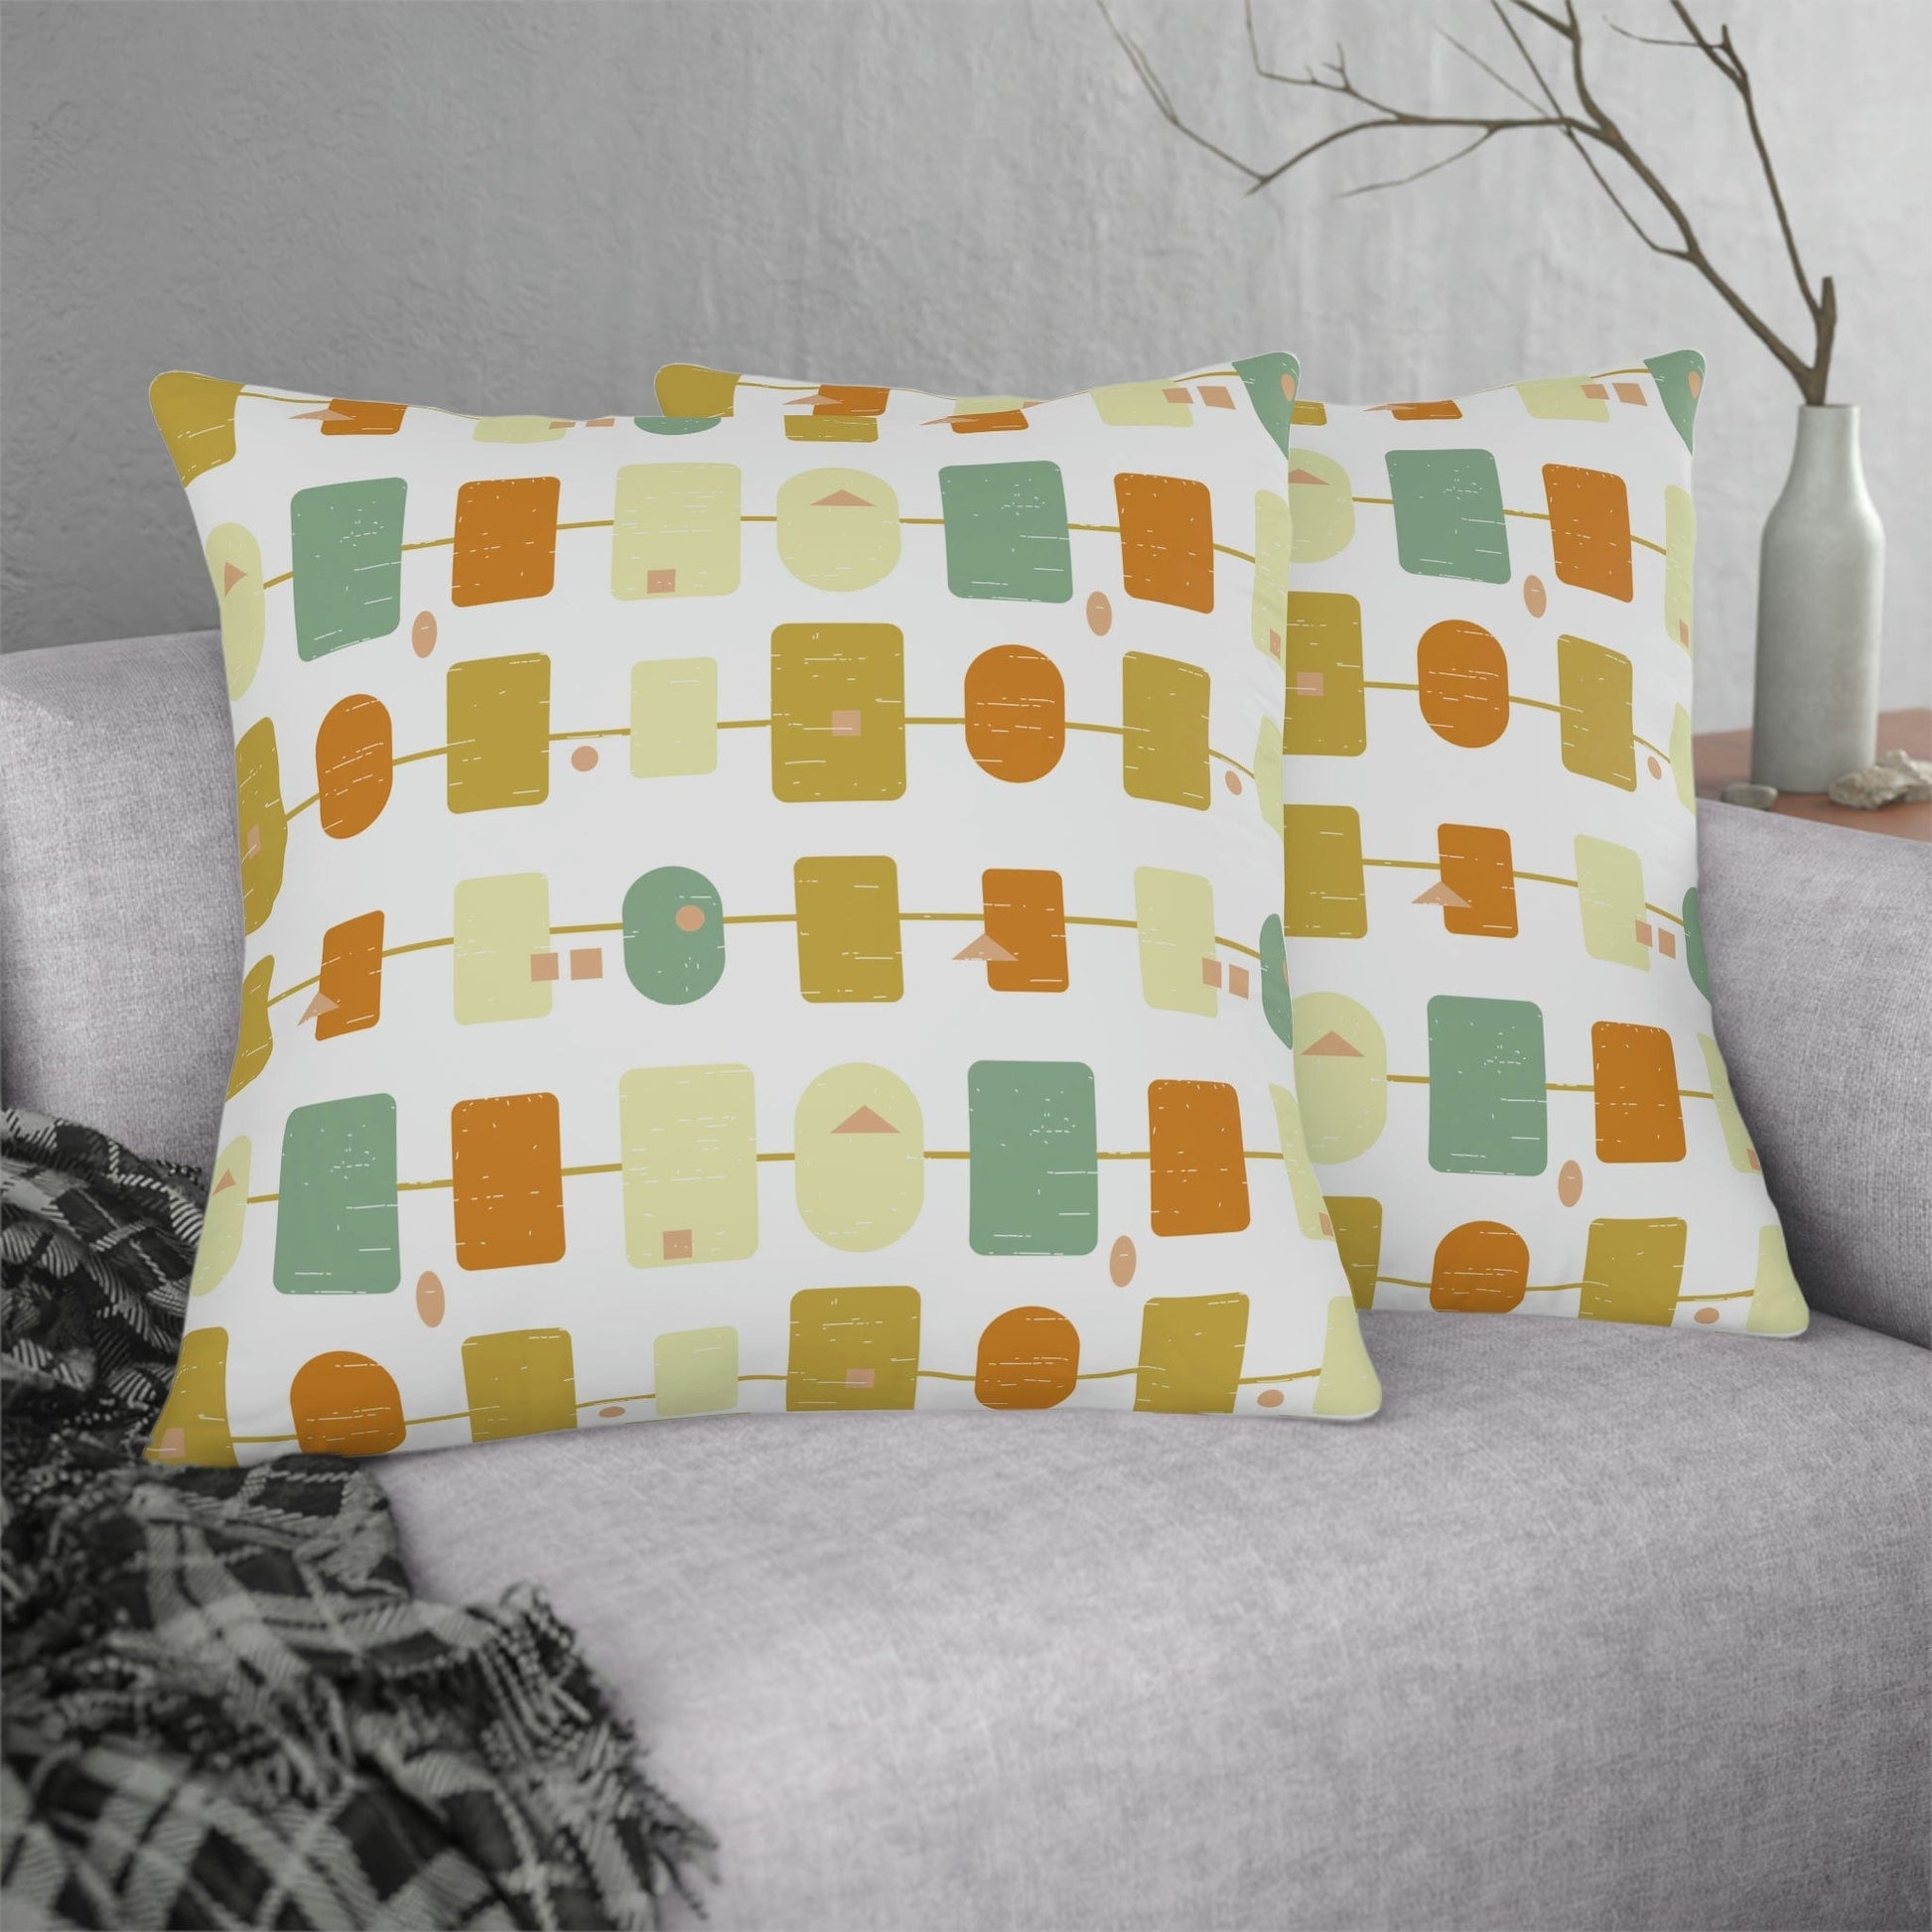 Kate McEnroe New York Outdoor Pillow in Mid Century Modern Abstract Geometric Print Outdoor Pillows 26" × 26" / Square 23988416825404355400